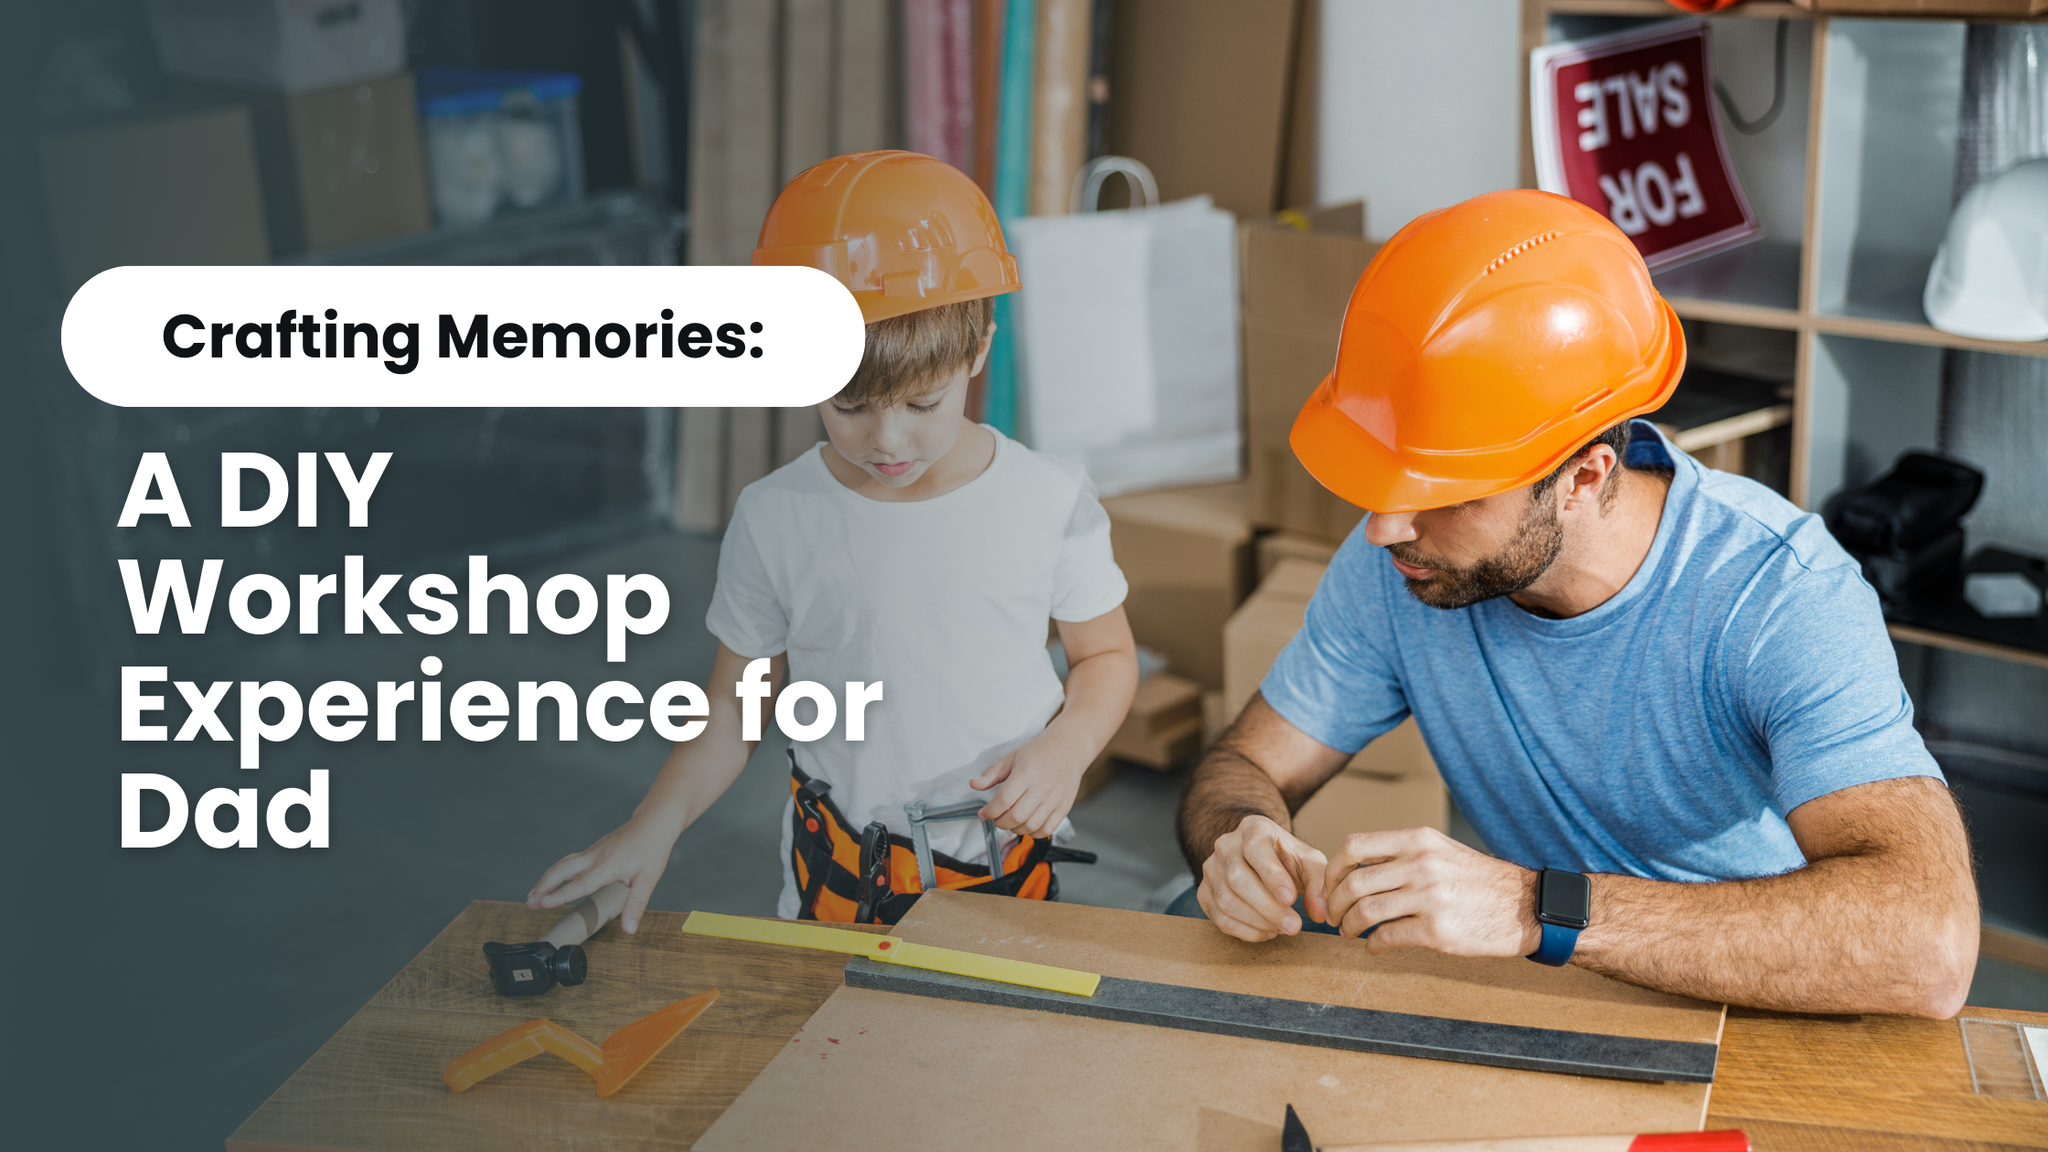 Crafting Memories: A DIY Workshop Experience for Dad